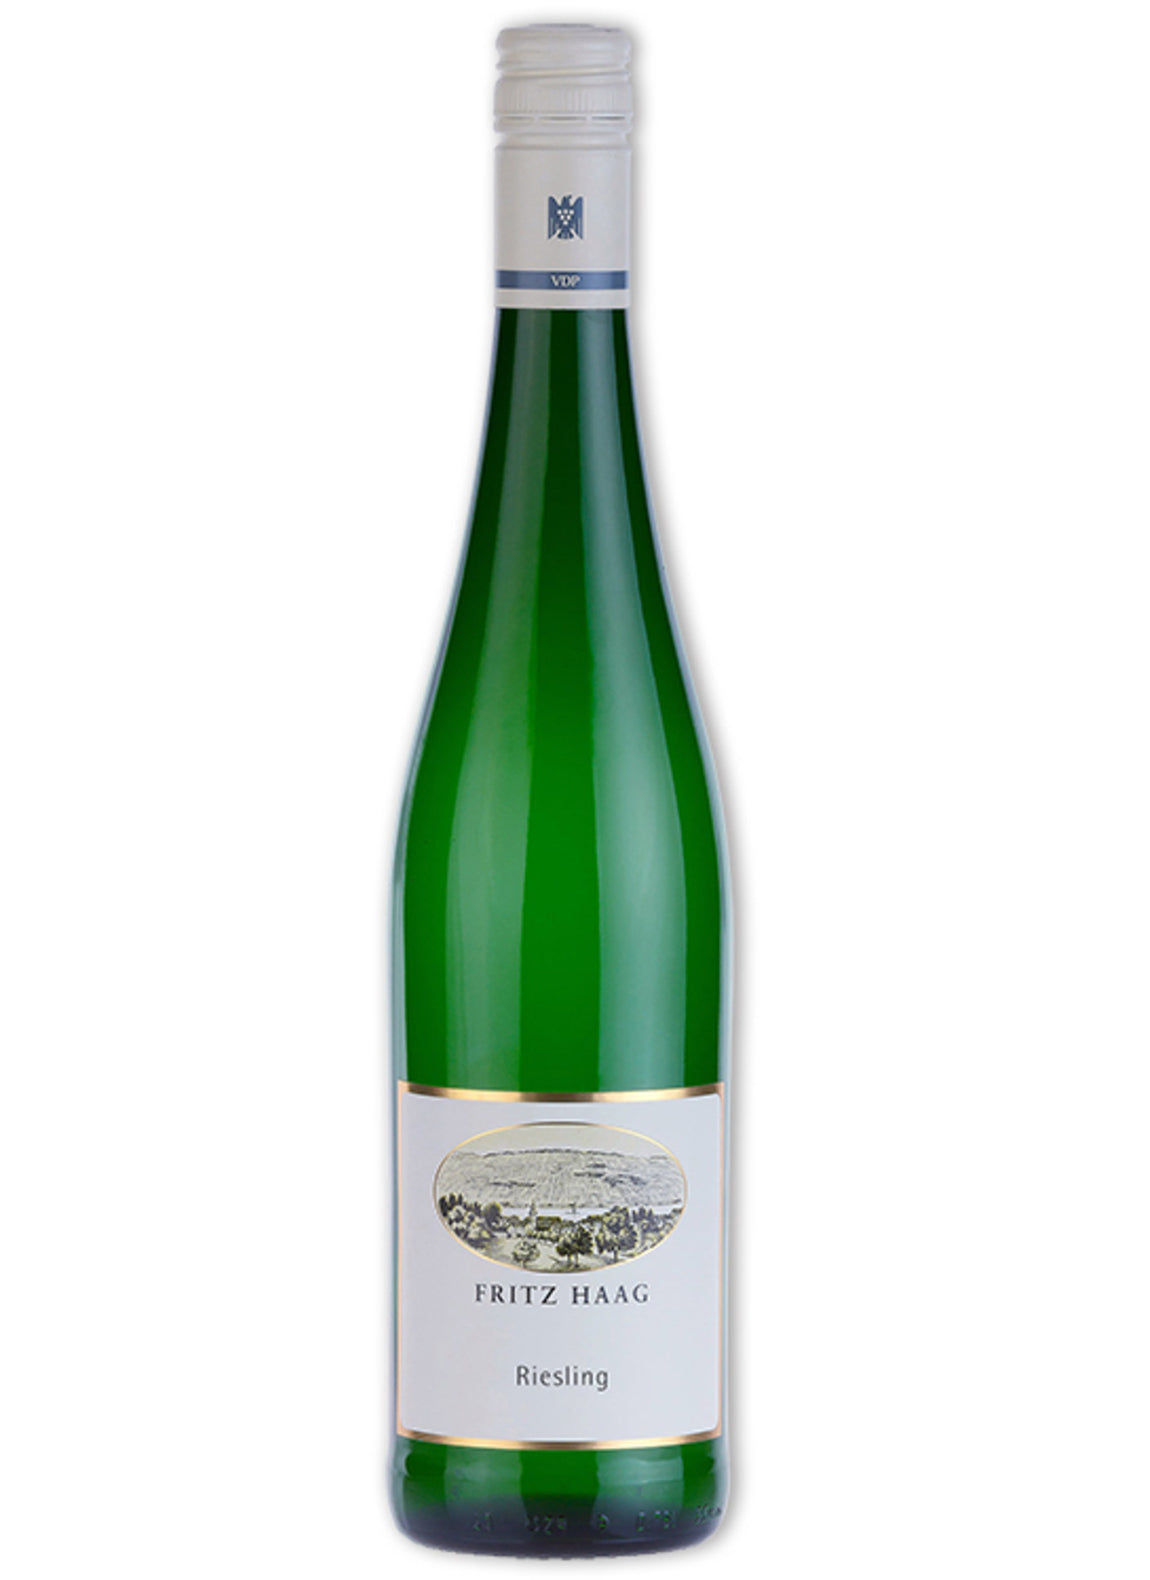 Fritz Haag Riesling 2020